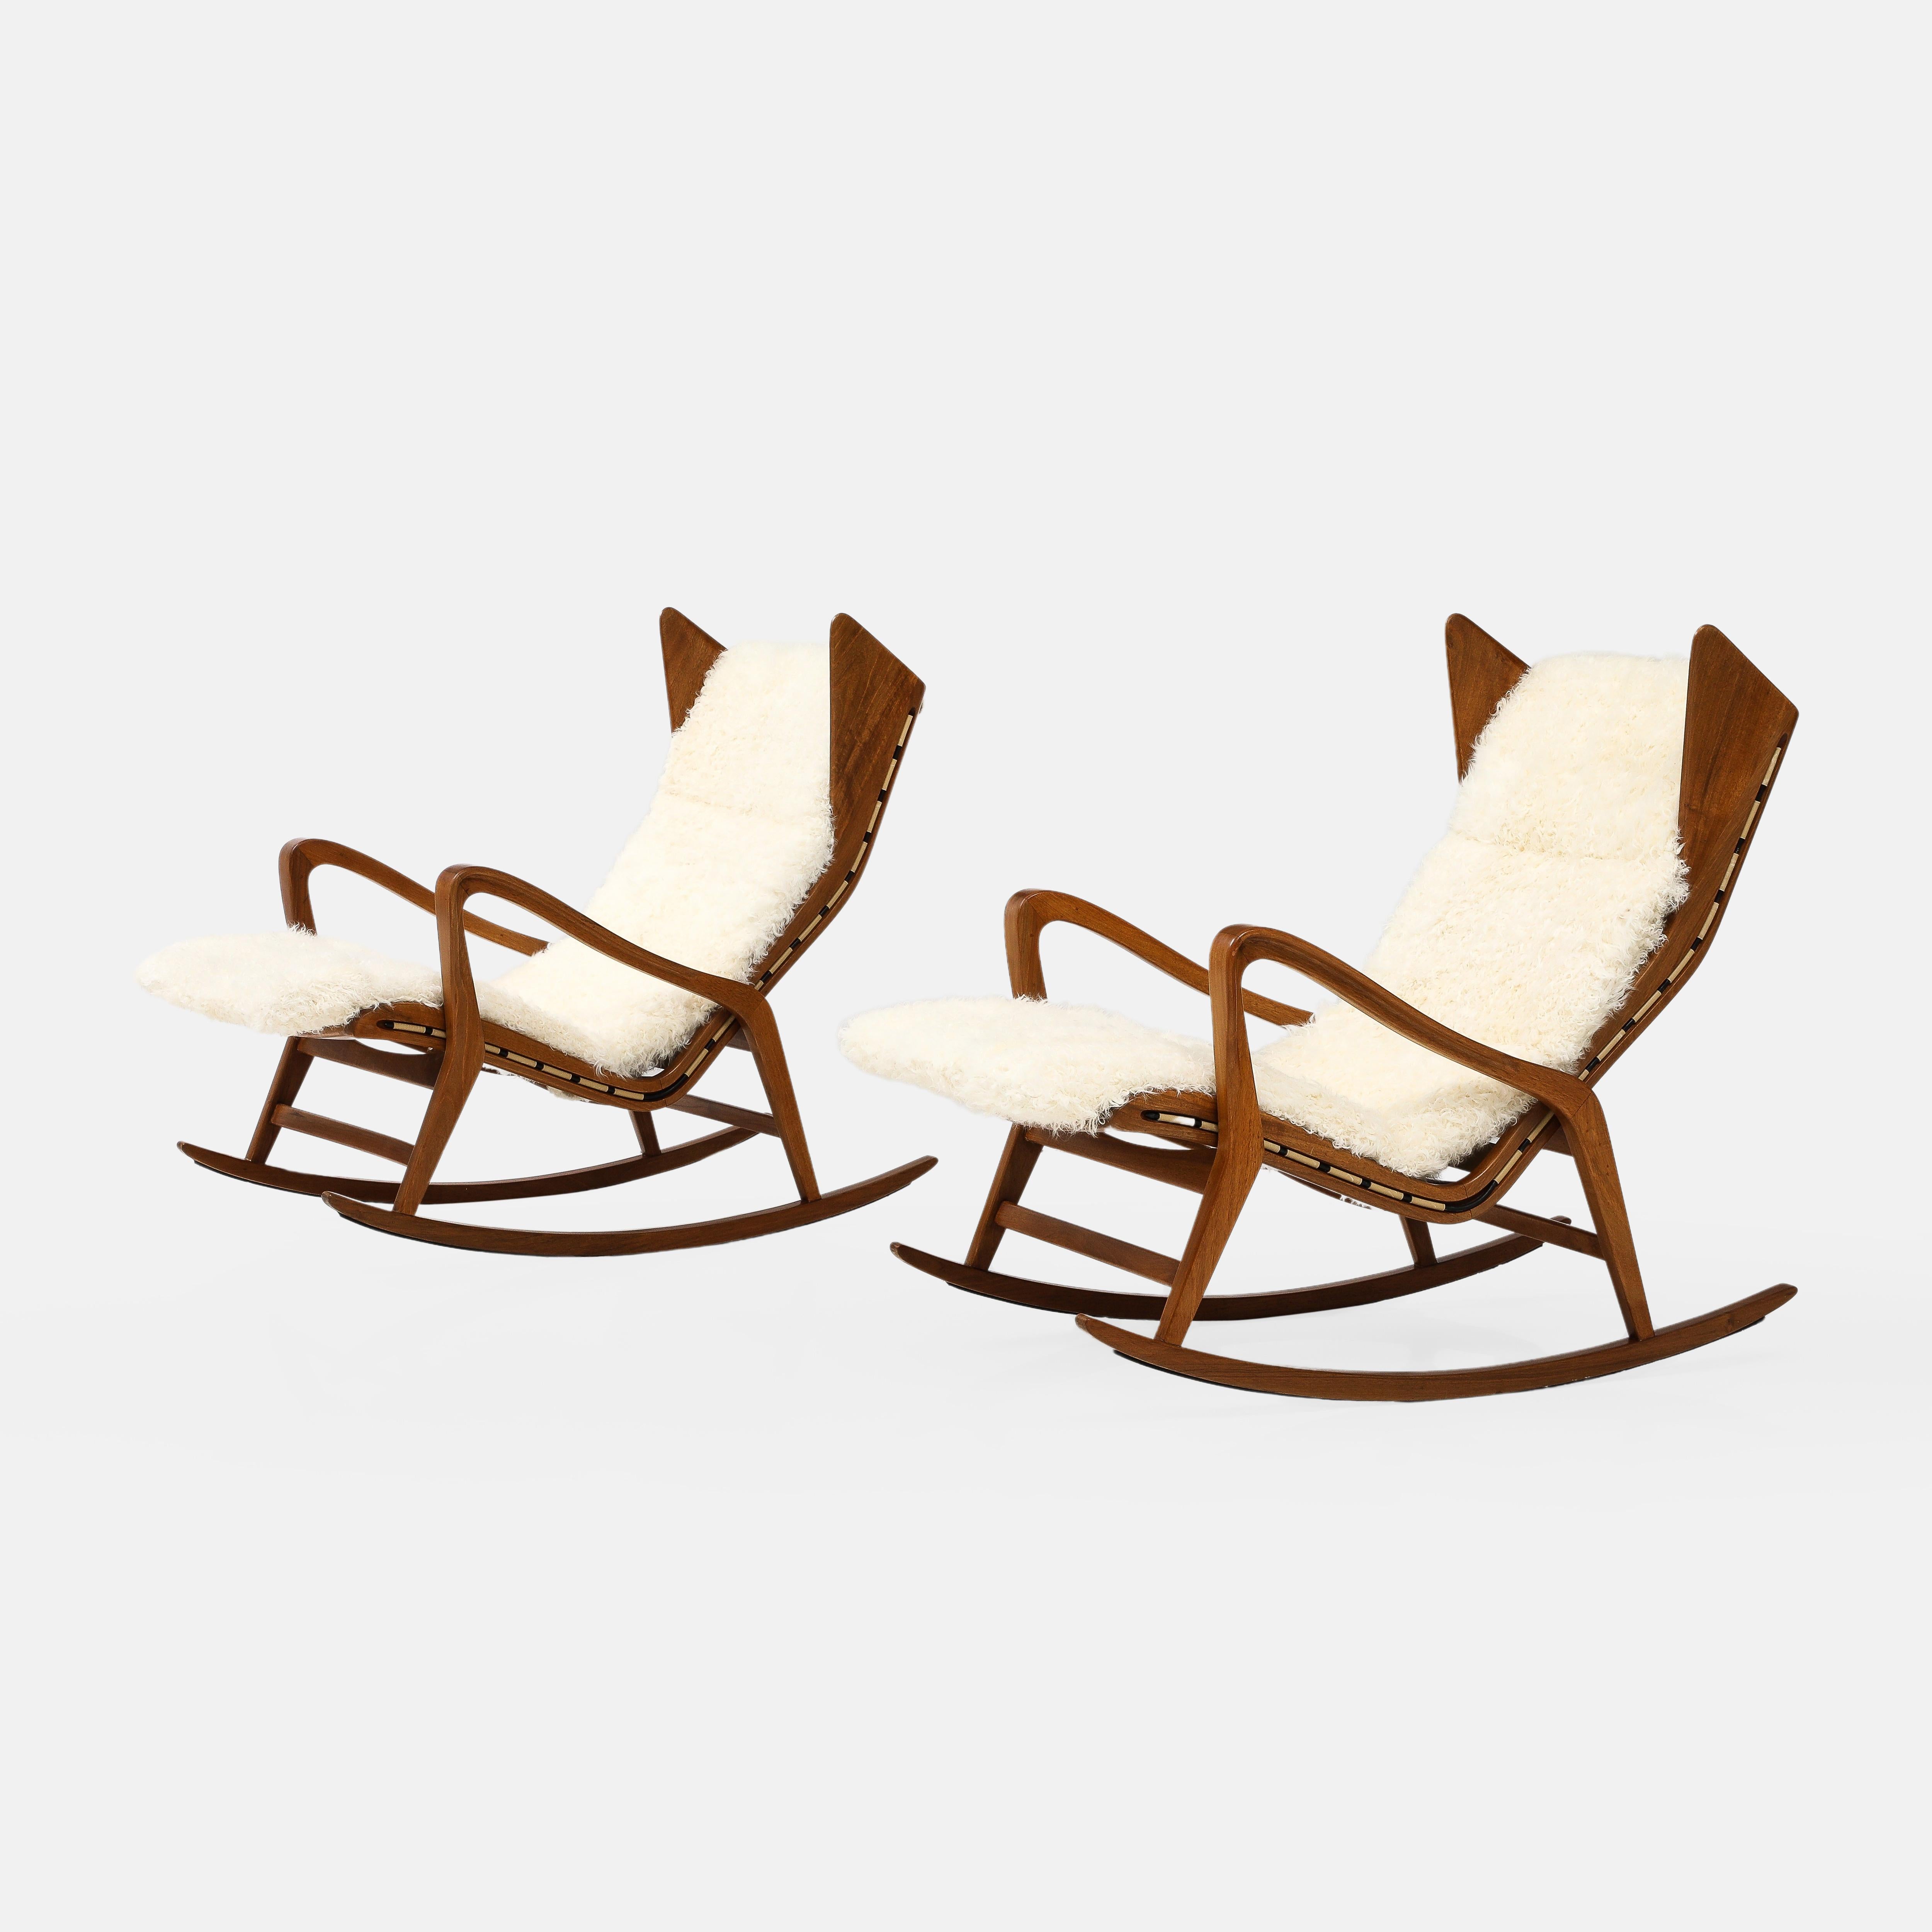 Cassina Walnut Rocking Lounge Chairs Model 572 in Ivory Kalgan Lambskin, 1950s In Good Condition For Sale In New York, NY